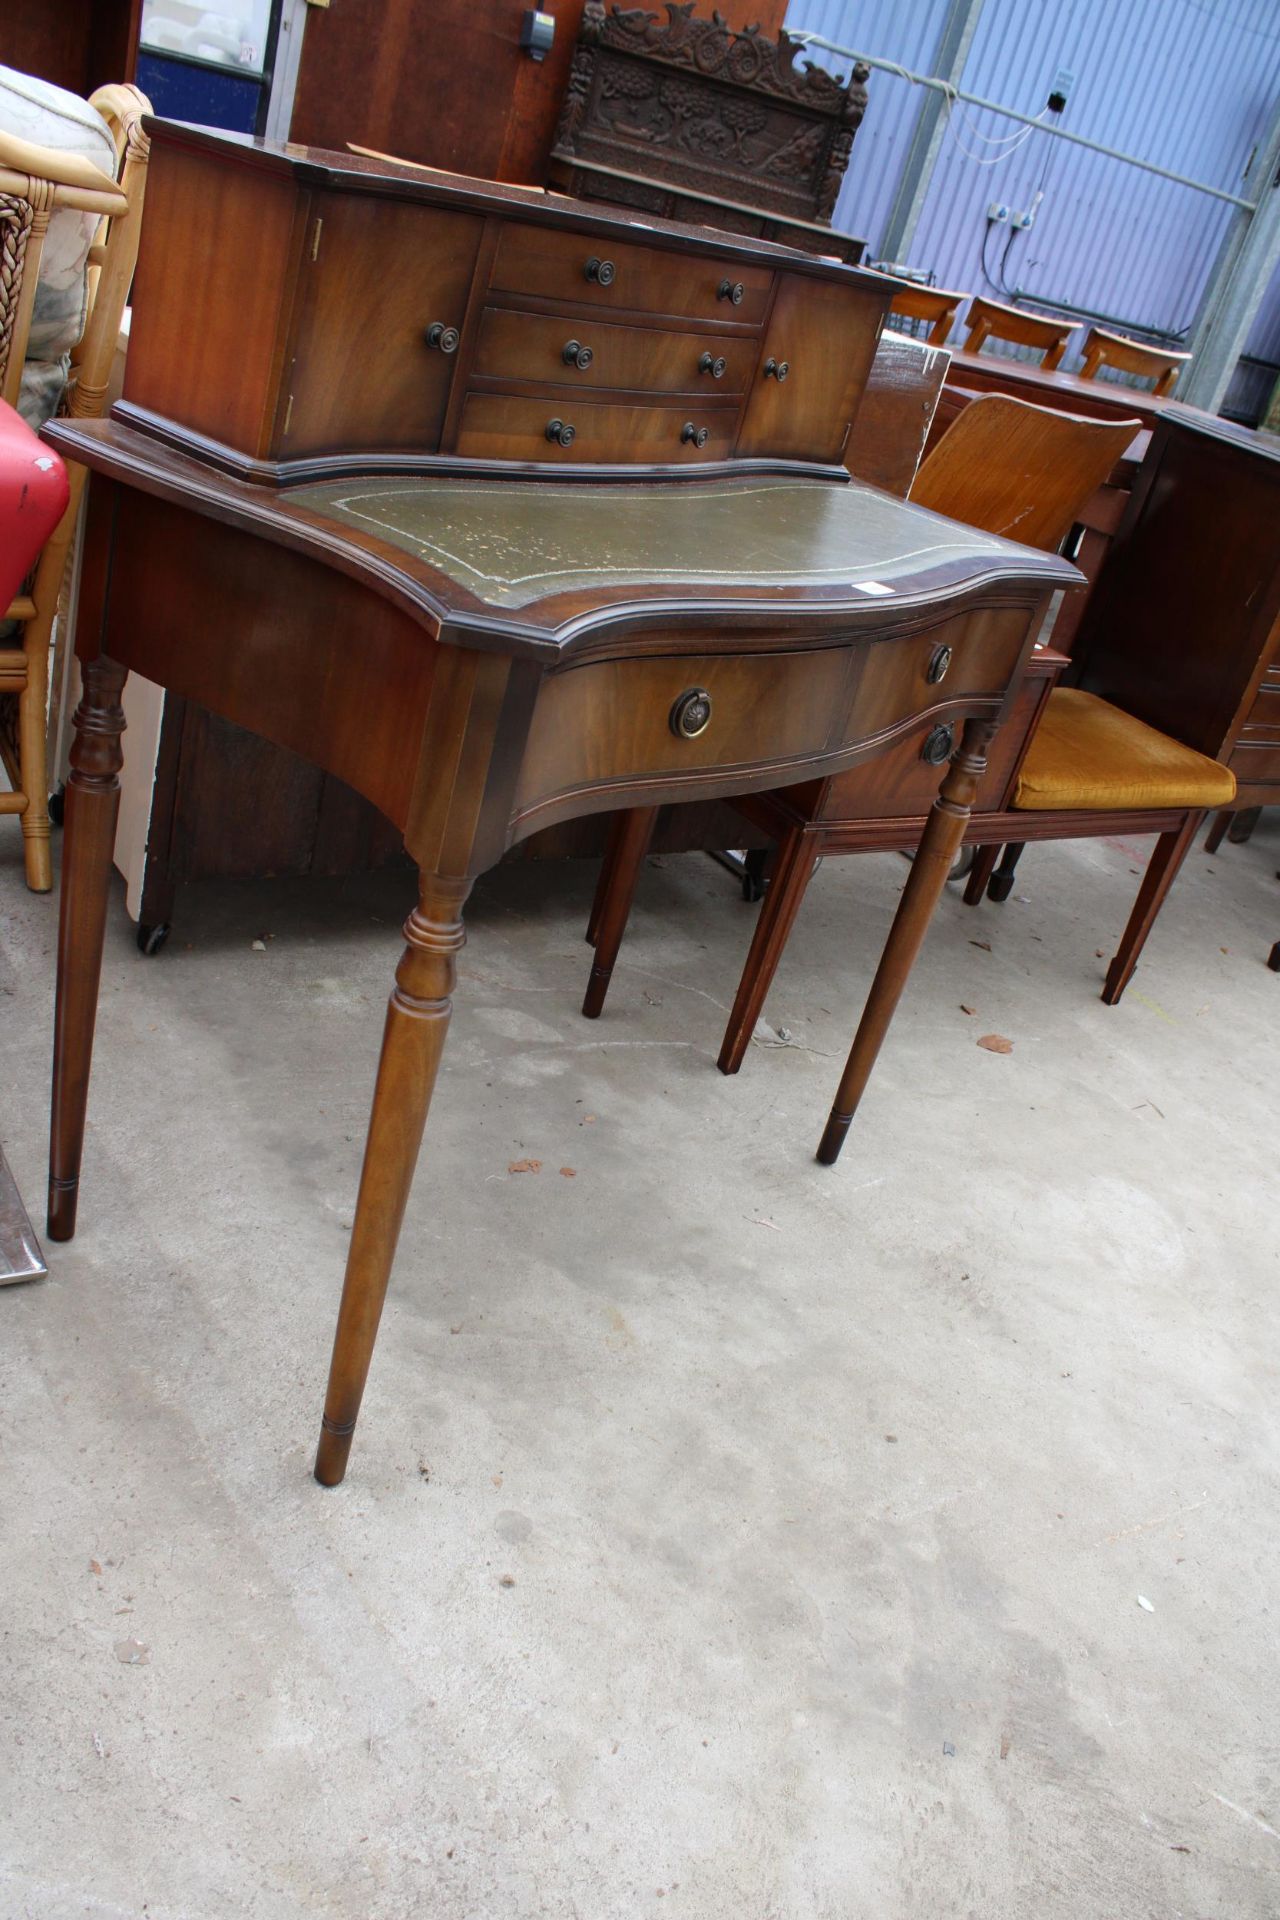 A REPRODUCTION MAHOGANY LADIES WRITING TABLE 36" WIDE WITH INSET LEATHER TOP - Image 2 of 4